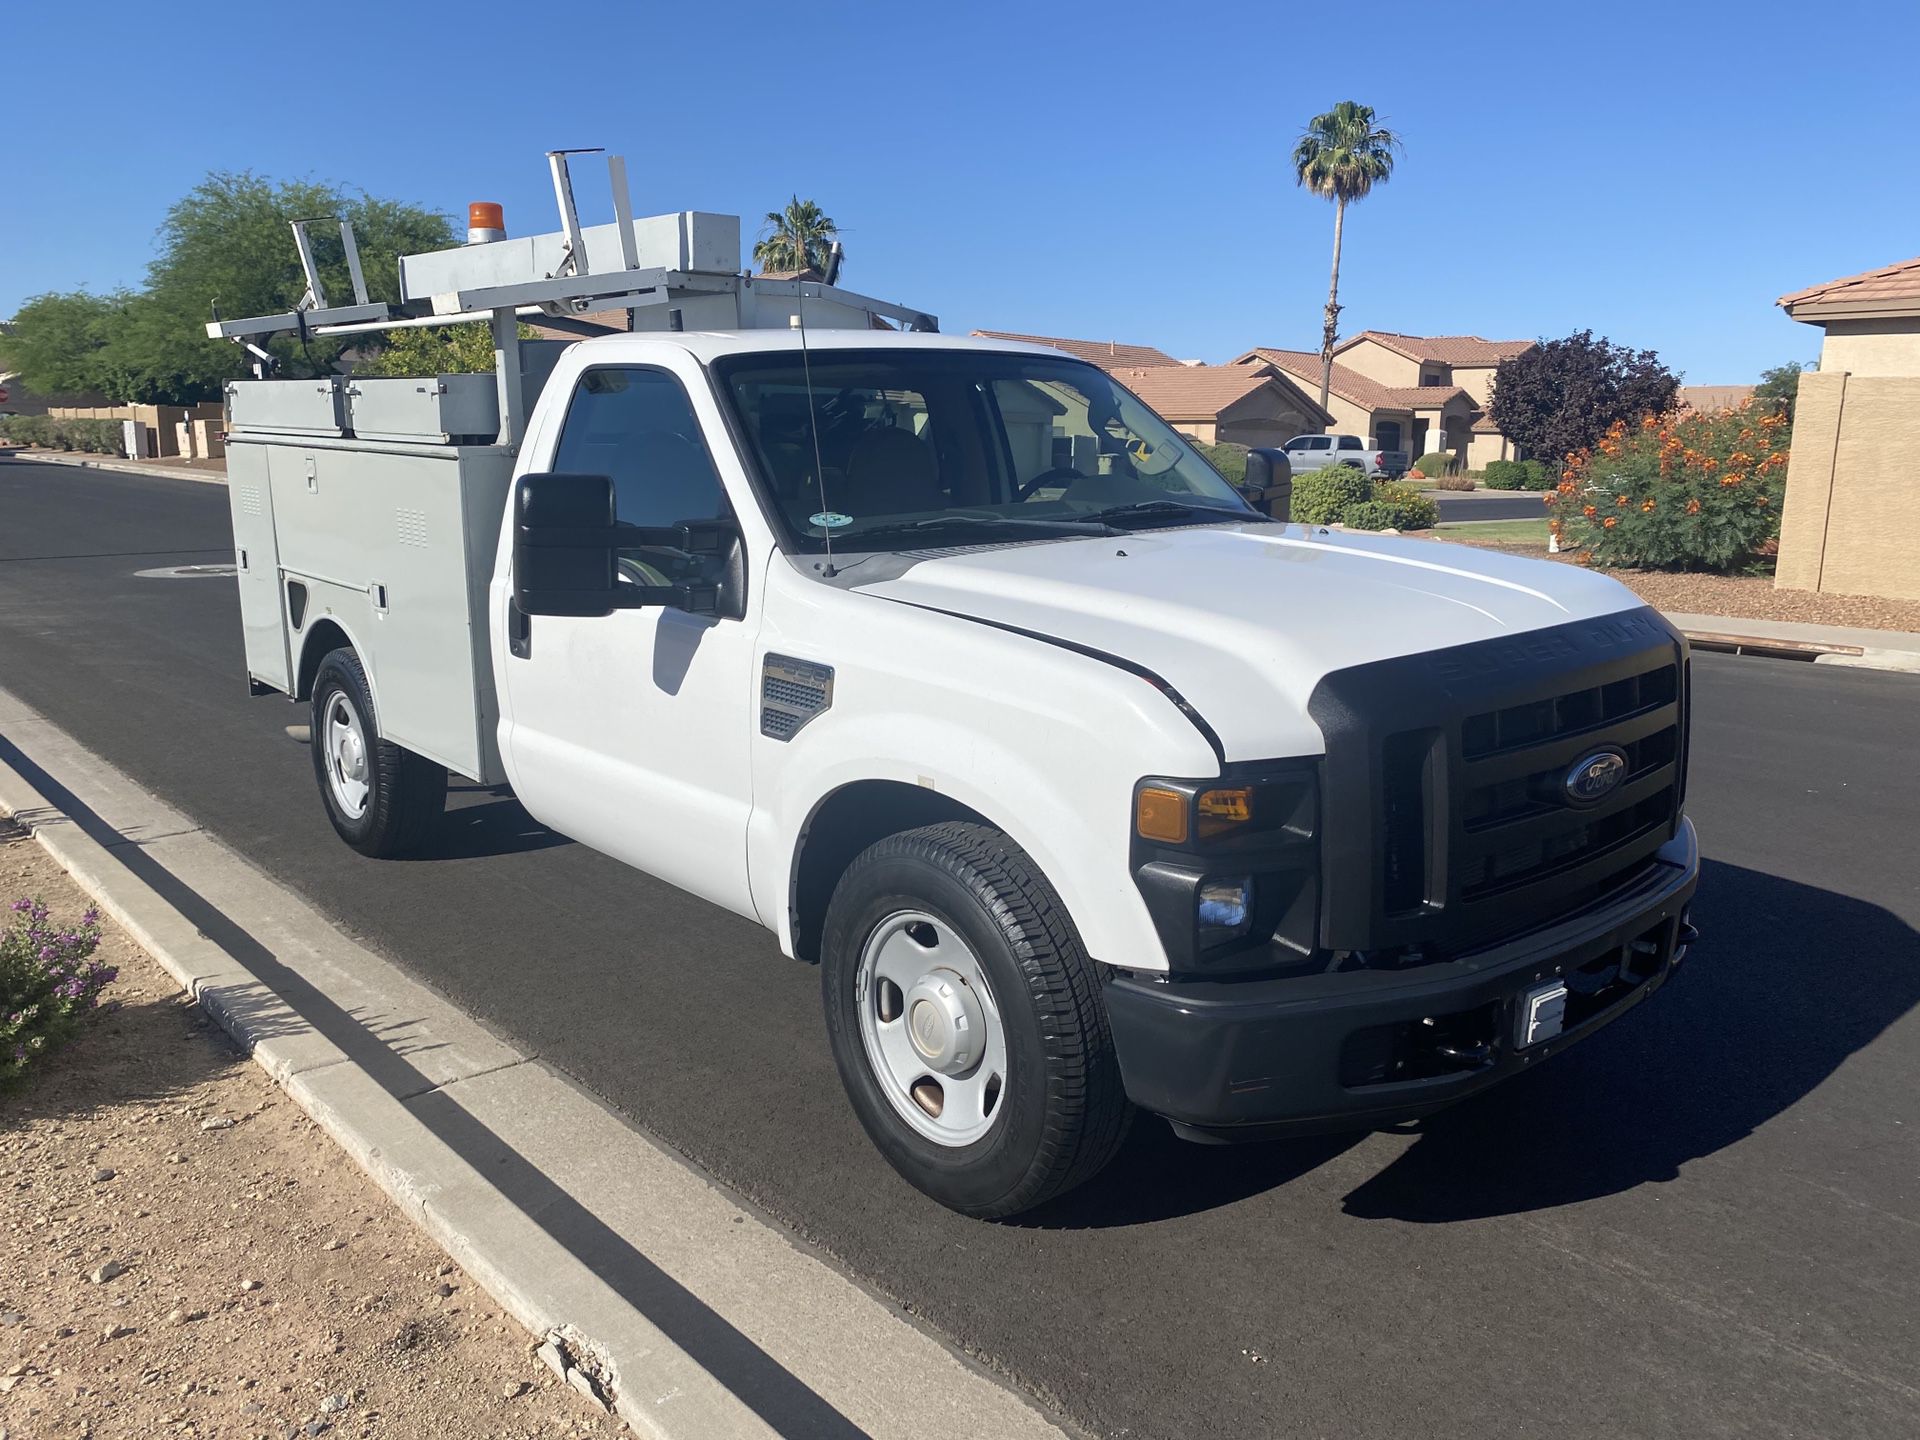 2008 FORD F350 UTILITY BODY IN GREAT CONDITION. VERY LOW MILEAGE